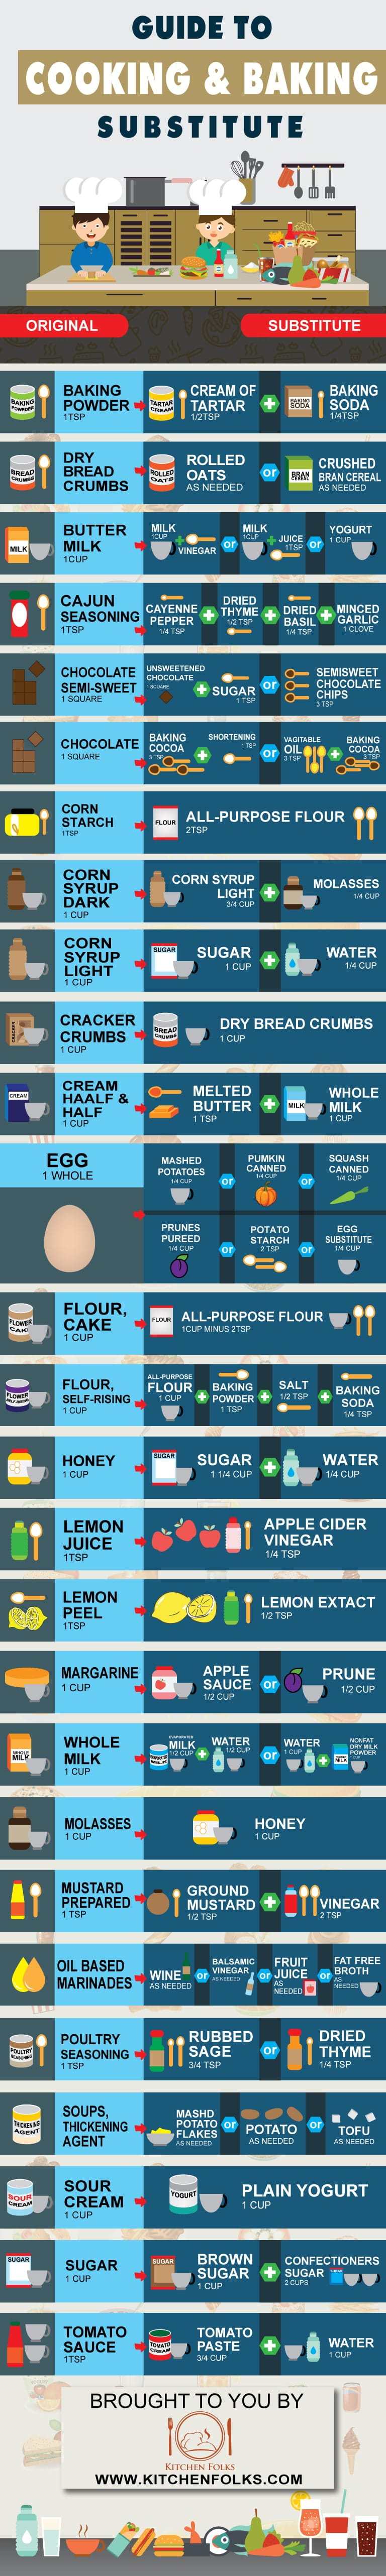 Guide to Cooking & Baking Substitute